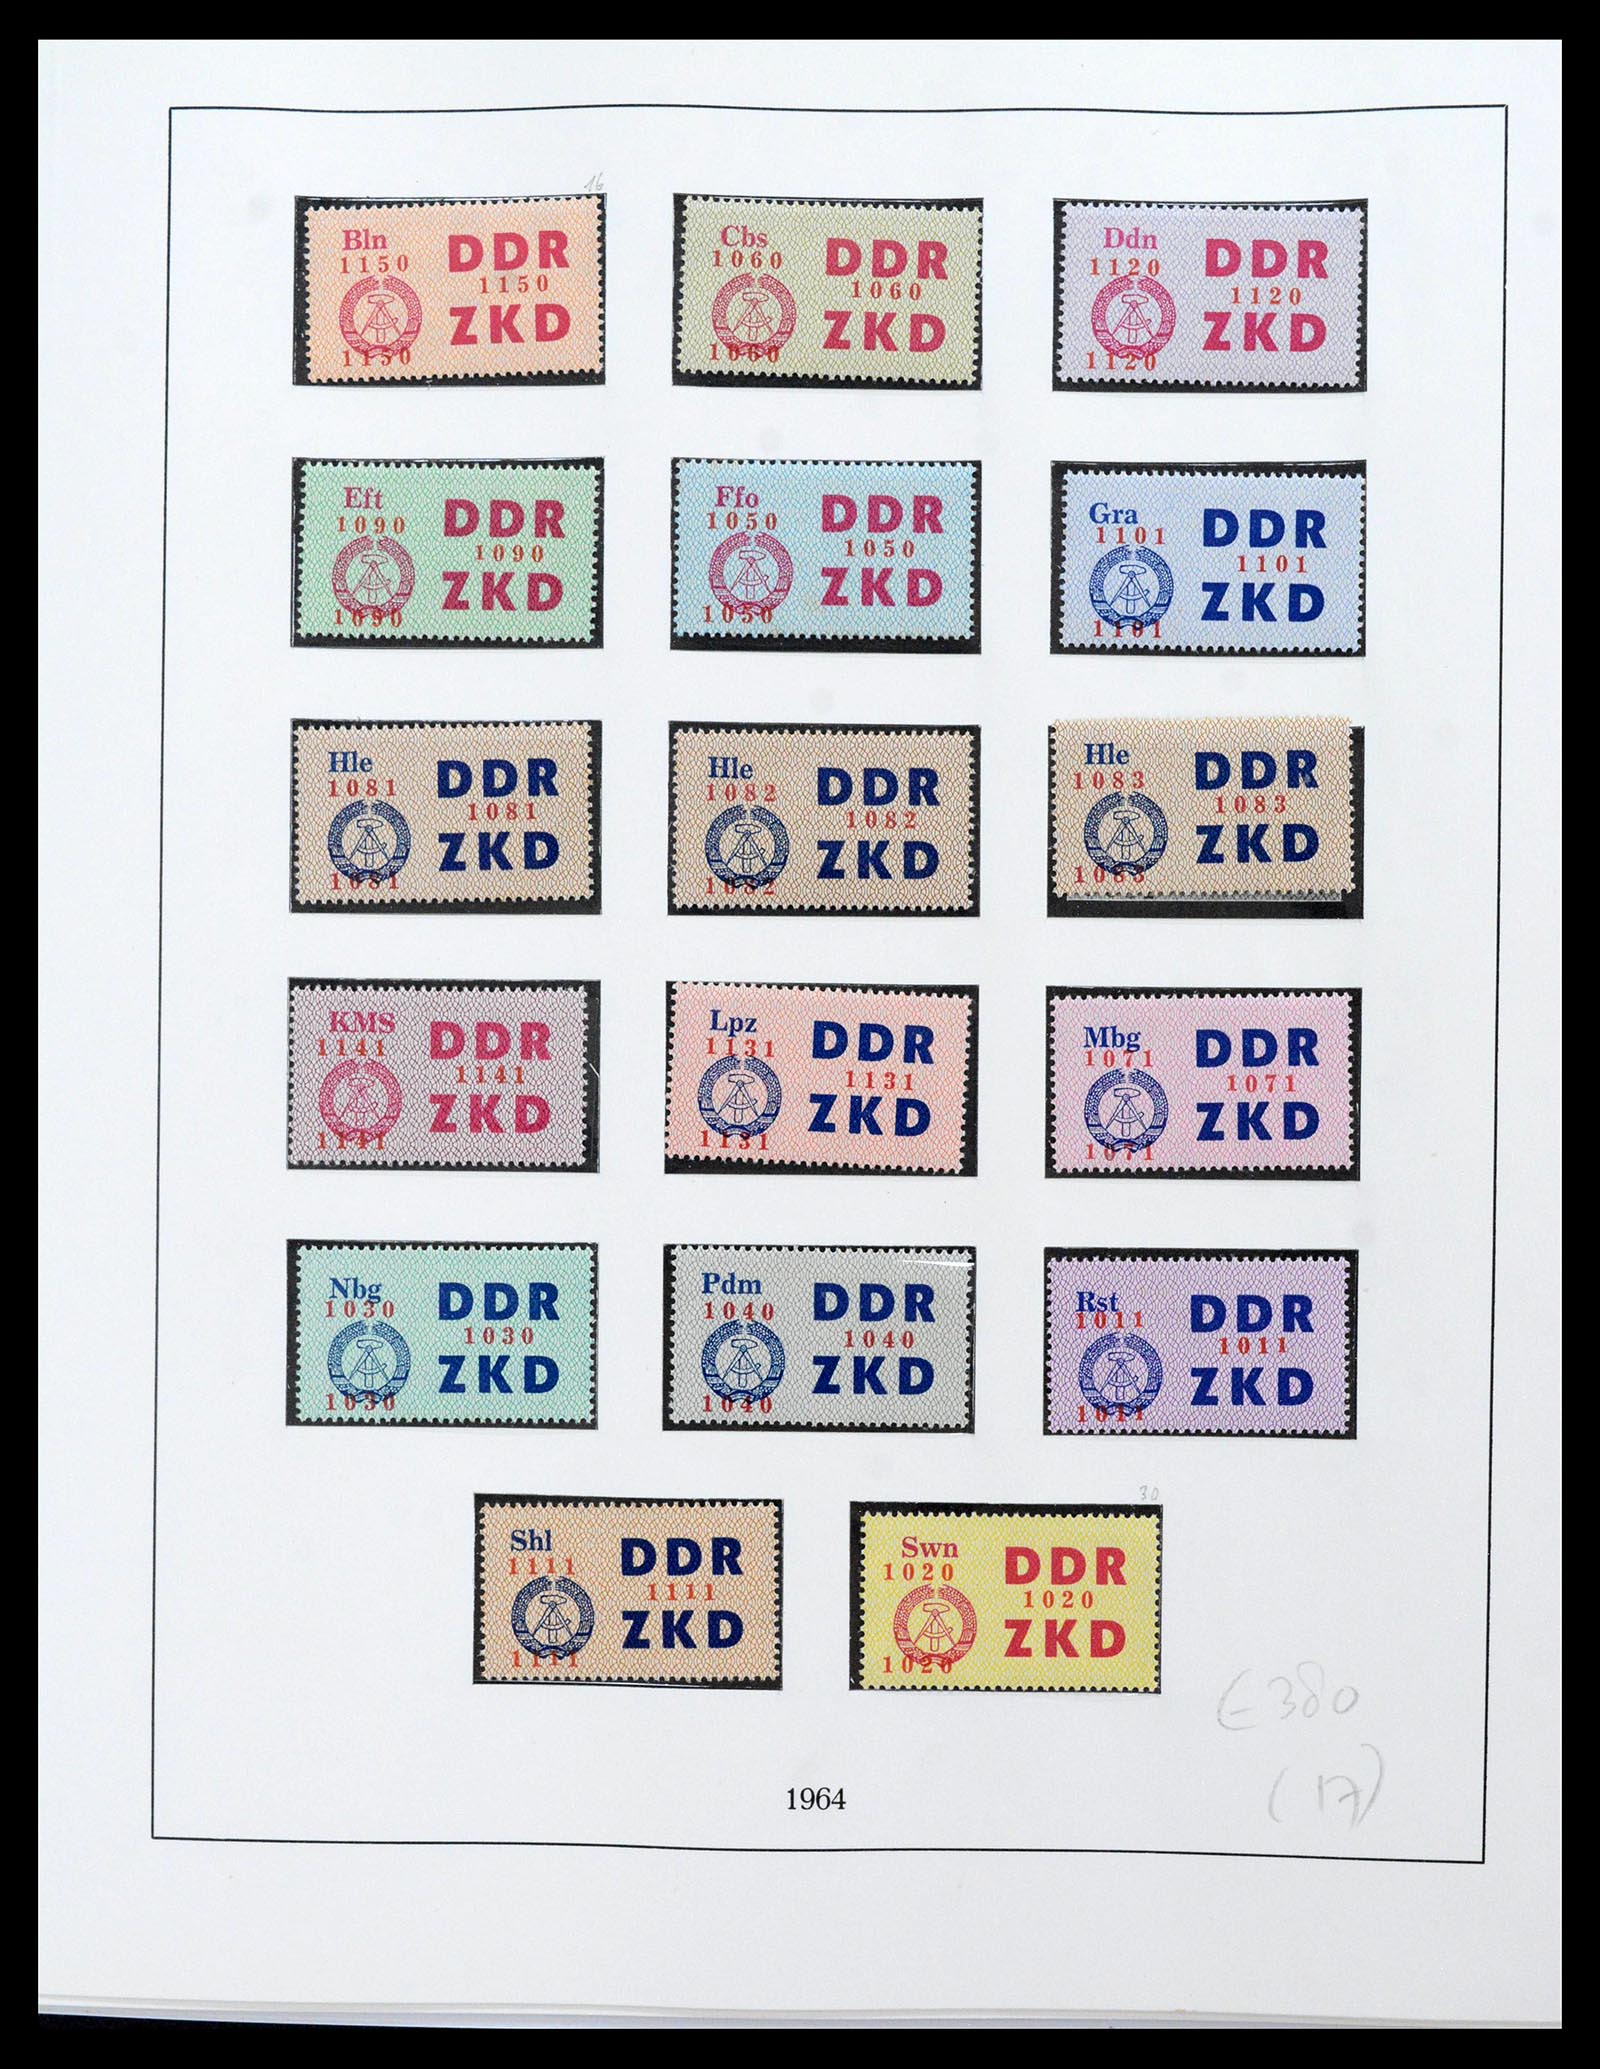 39376 0009 - Stamp collection 39376 GDR service stamps 1951-1965.